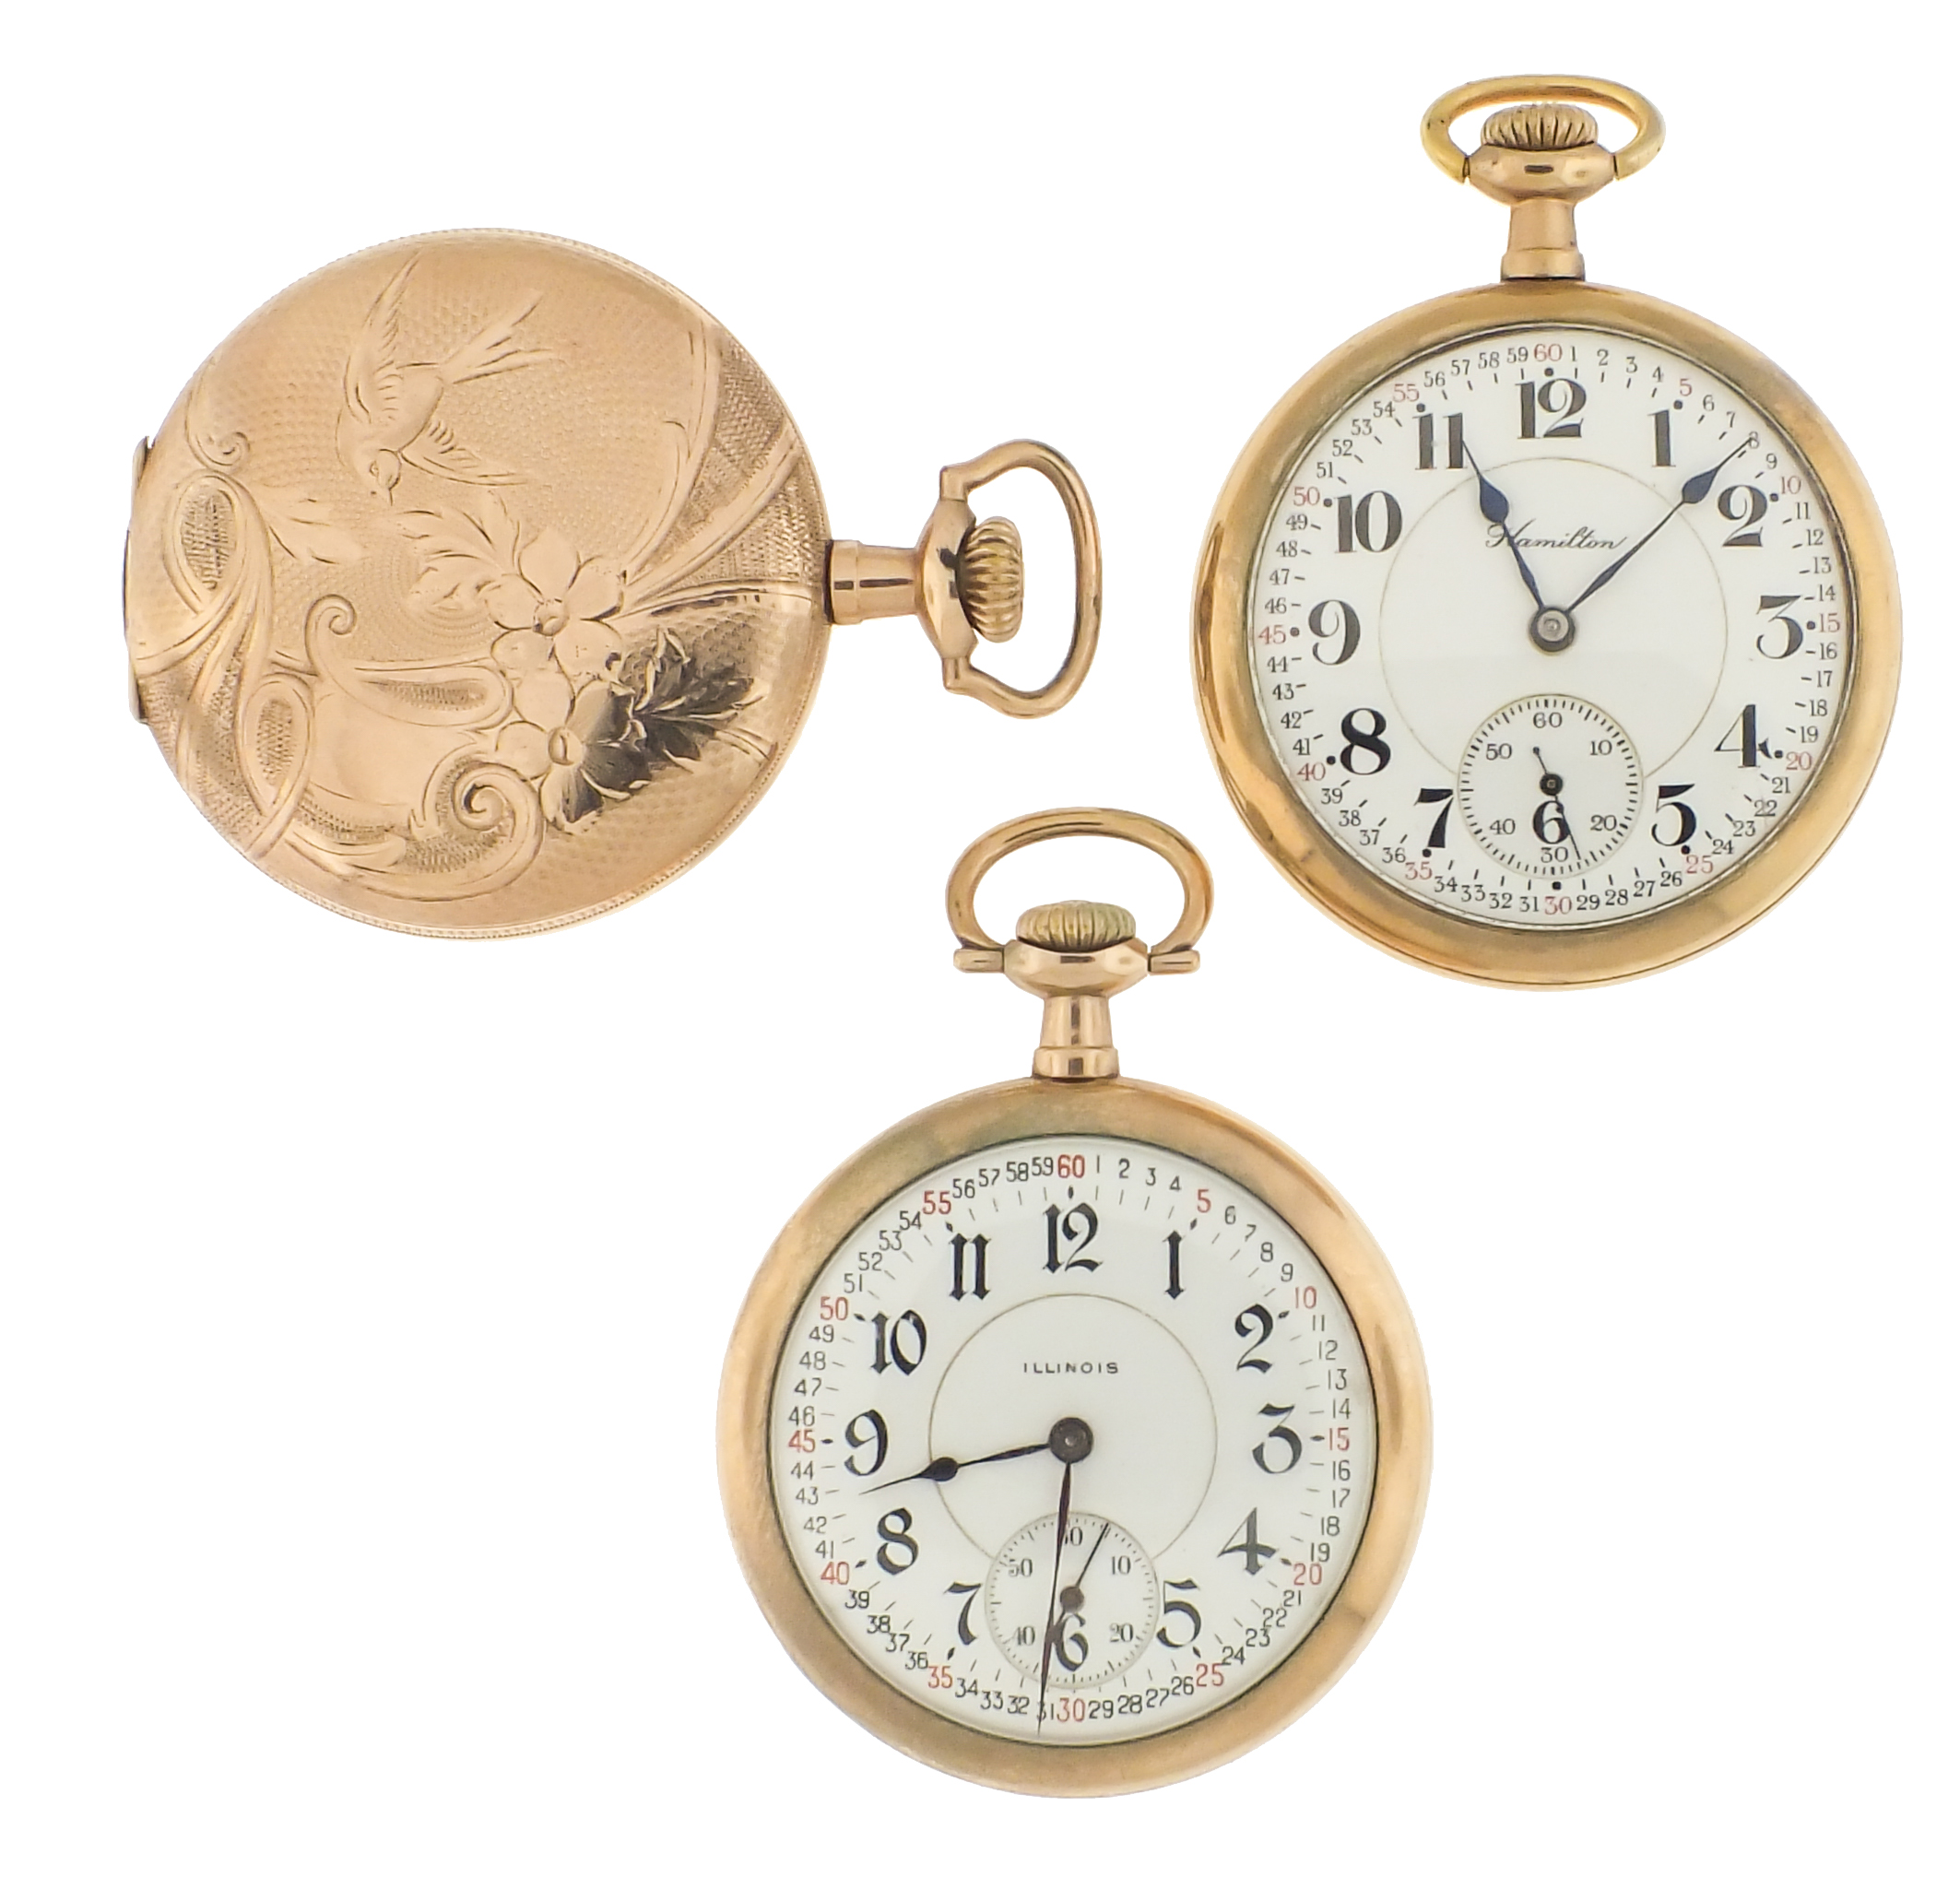 Seven American pocket watches